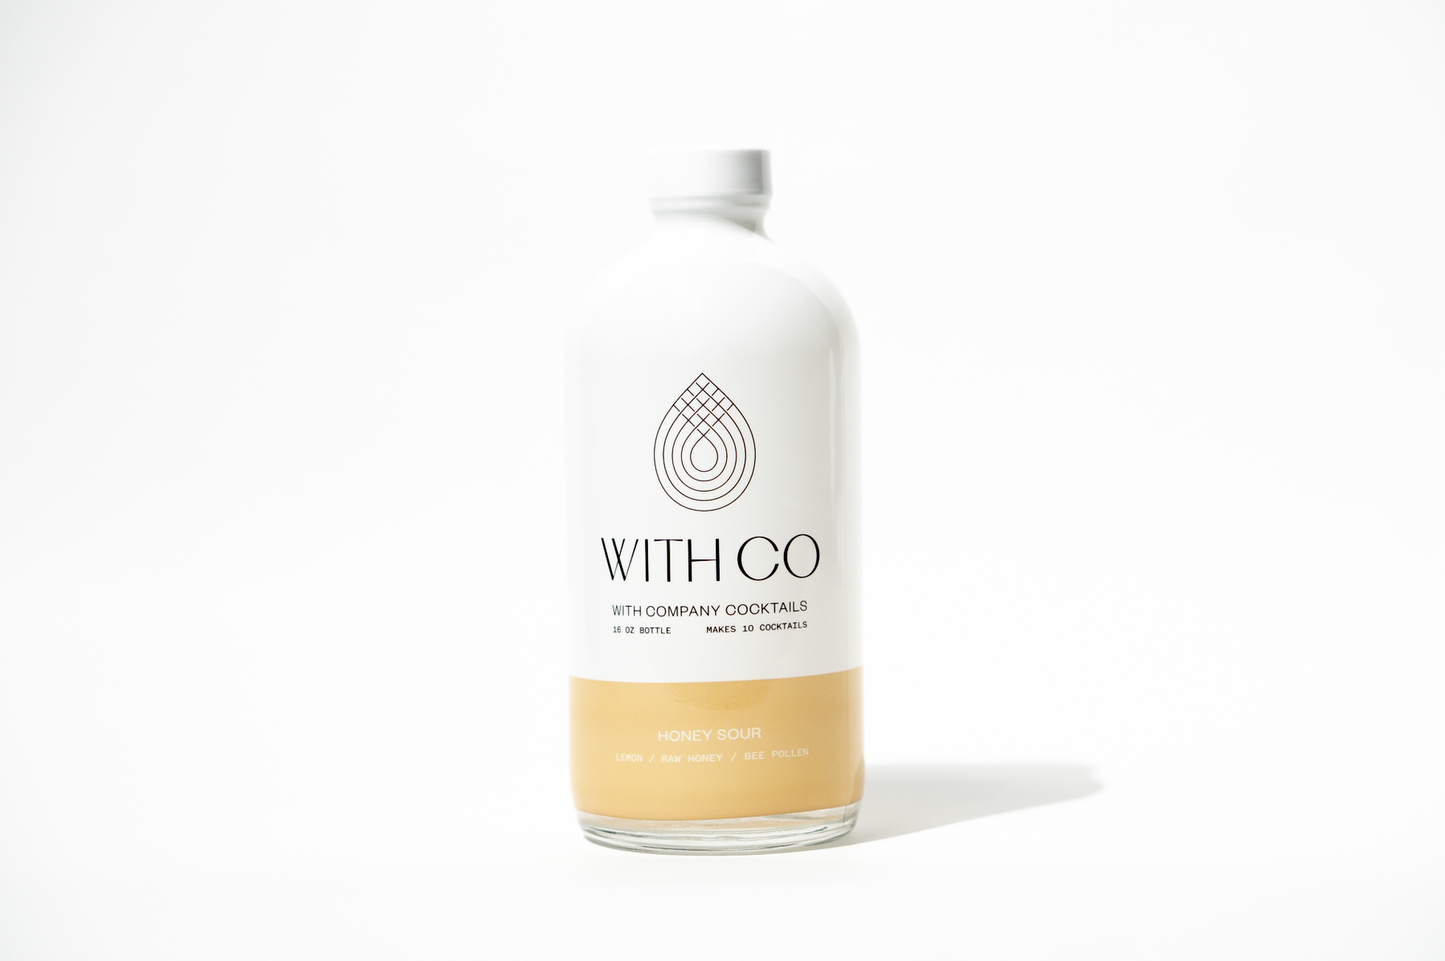 WithCo. Cocktails Drink Mix